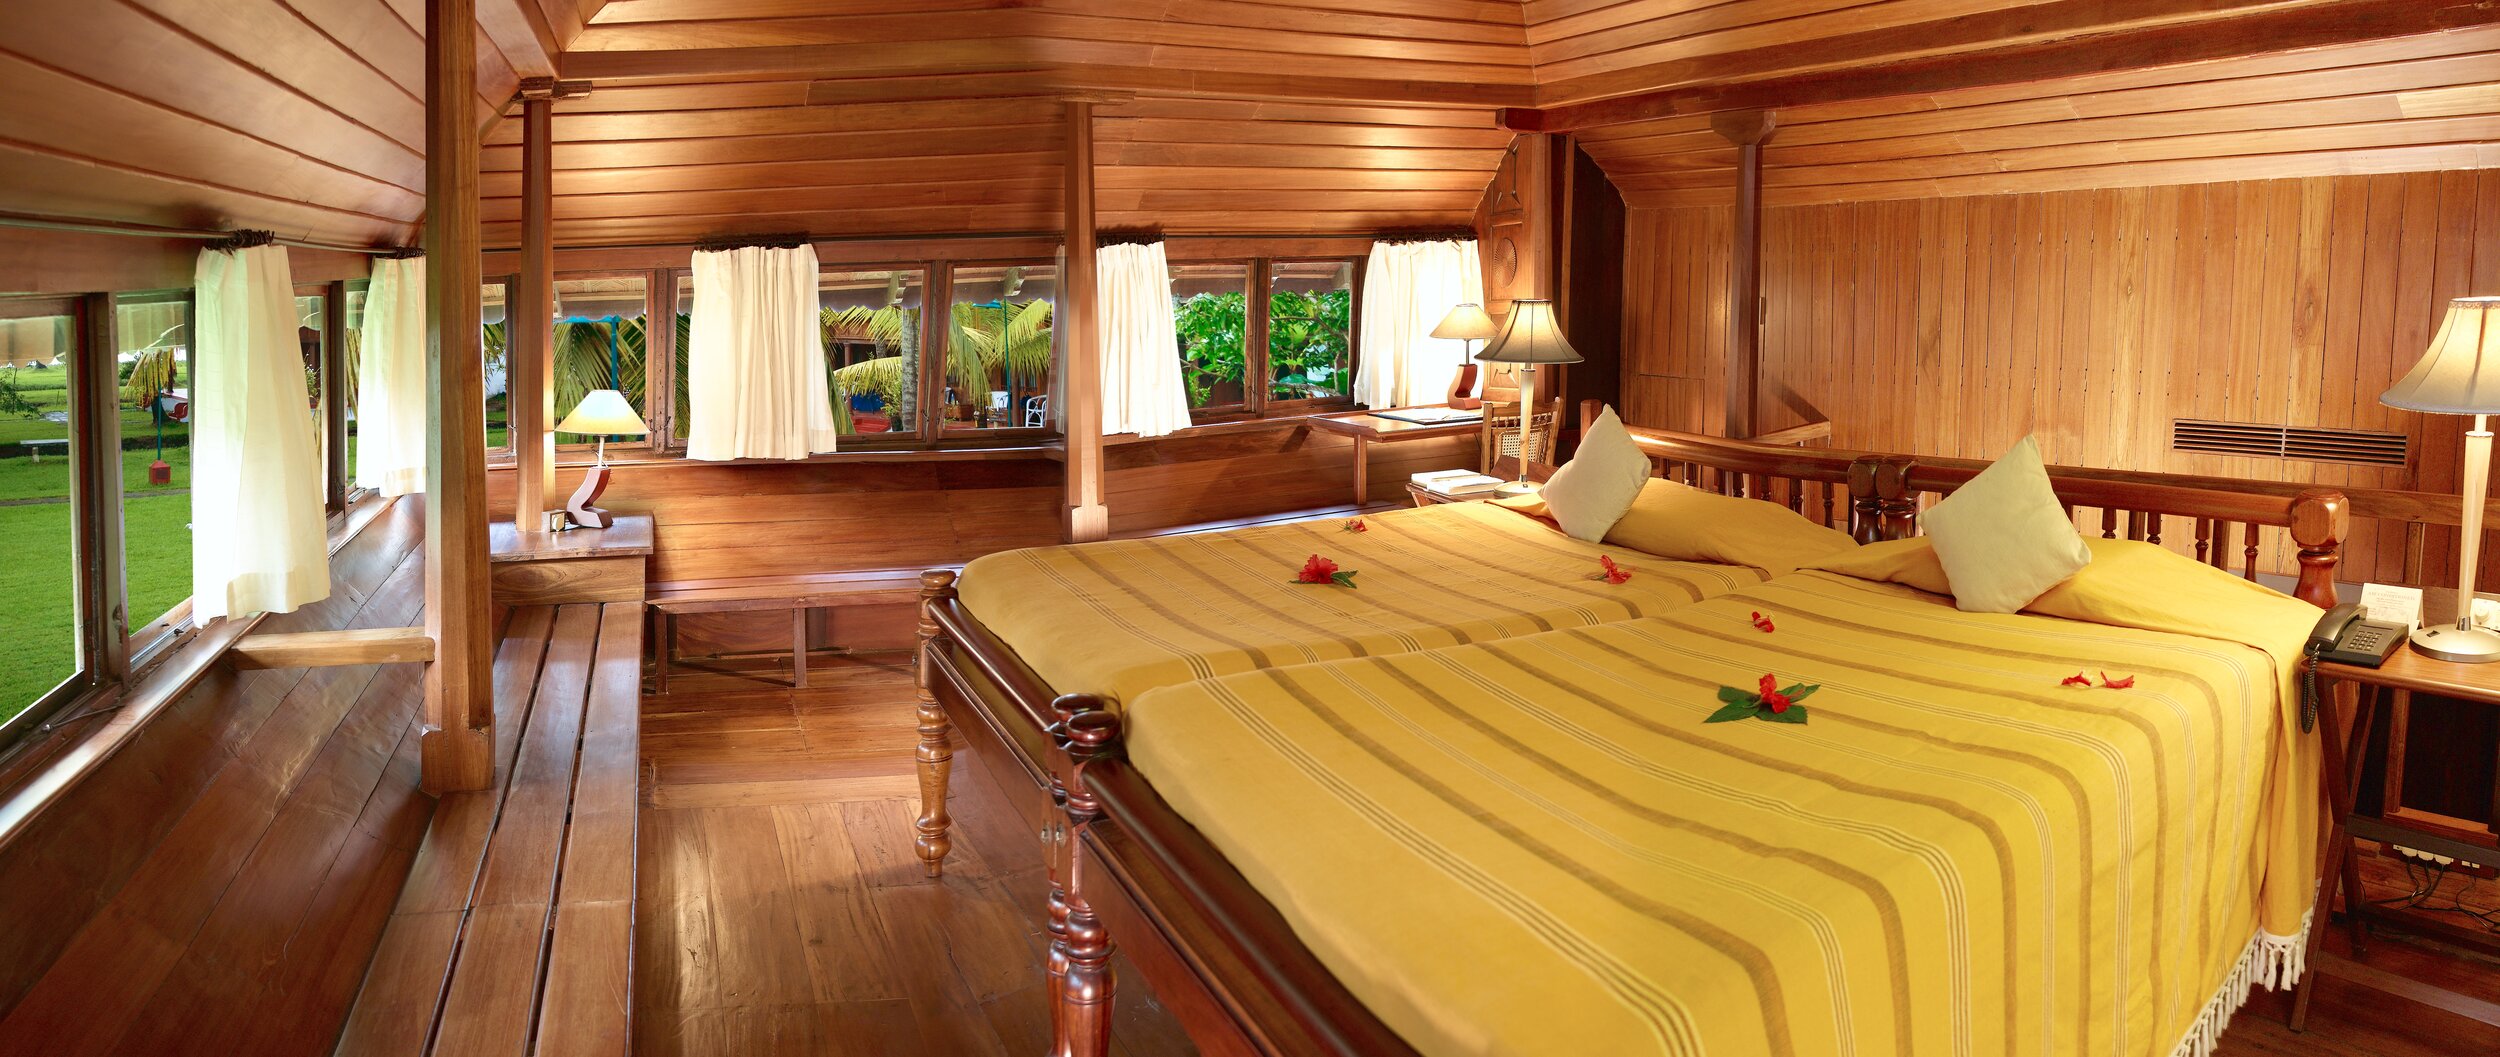 Coconut Lagoon - CGH Earth - Accommodation without giving up luxury.jpg